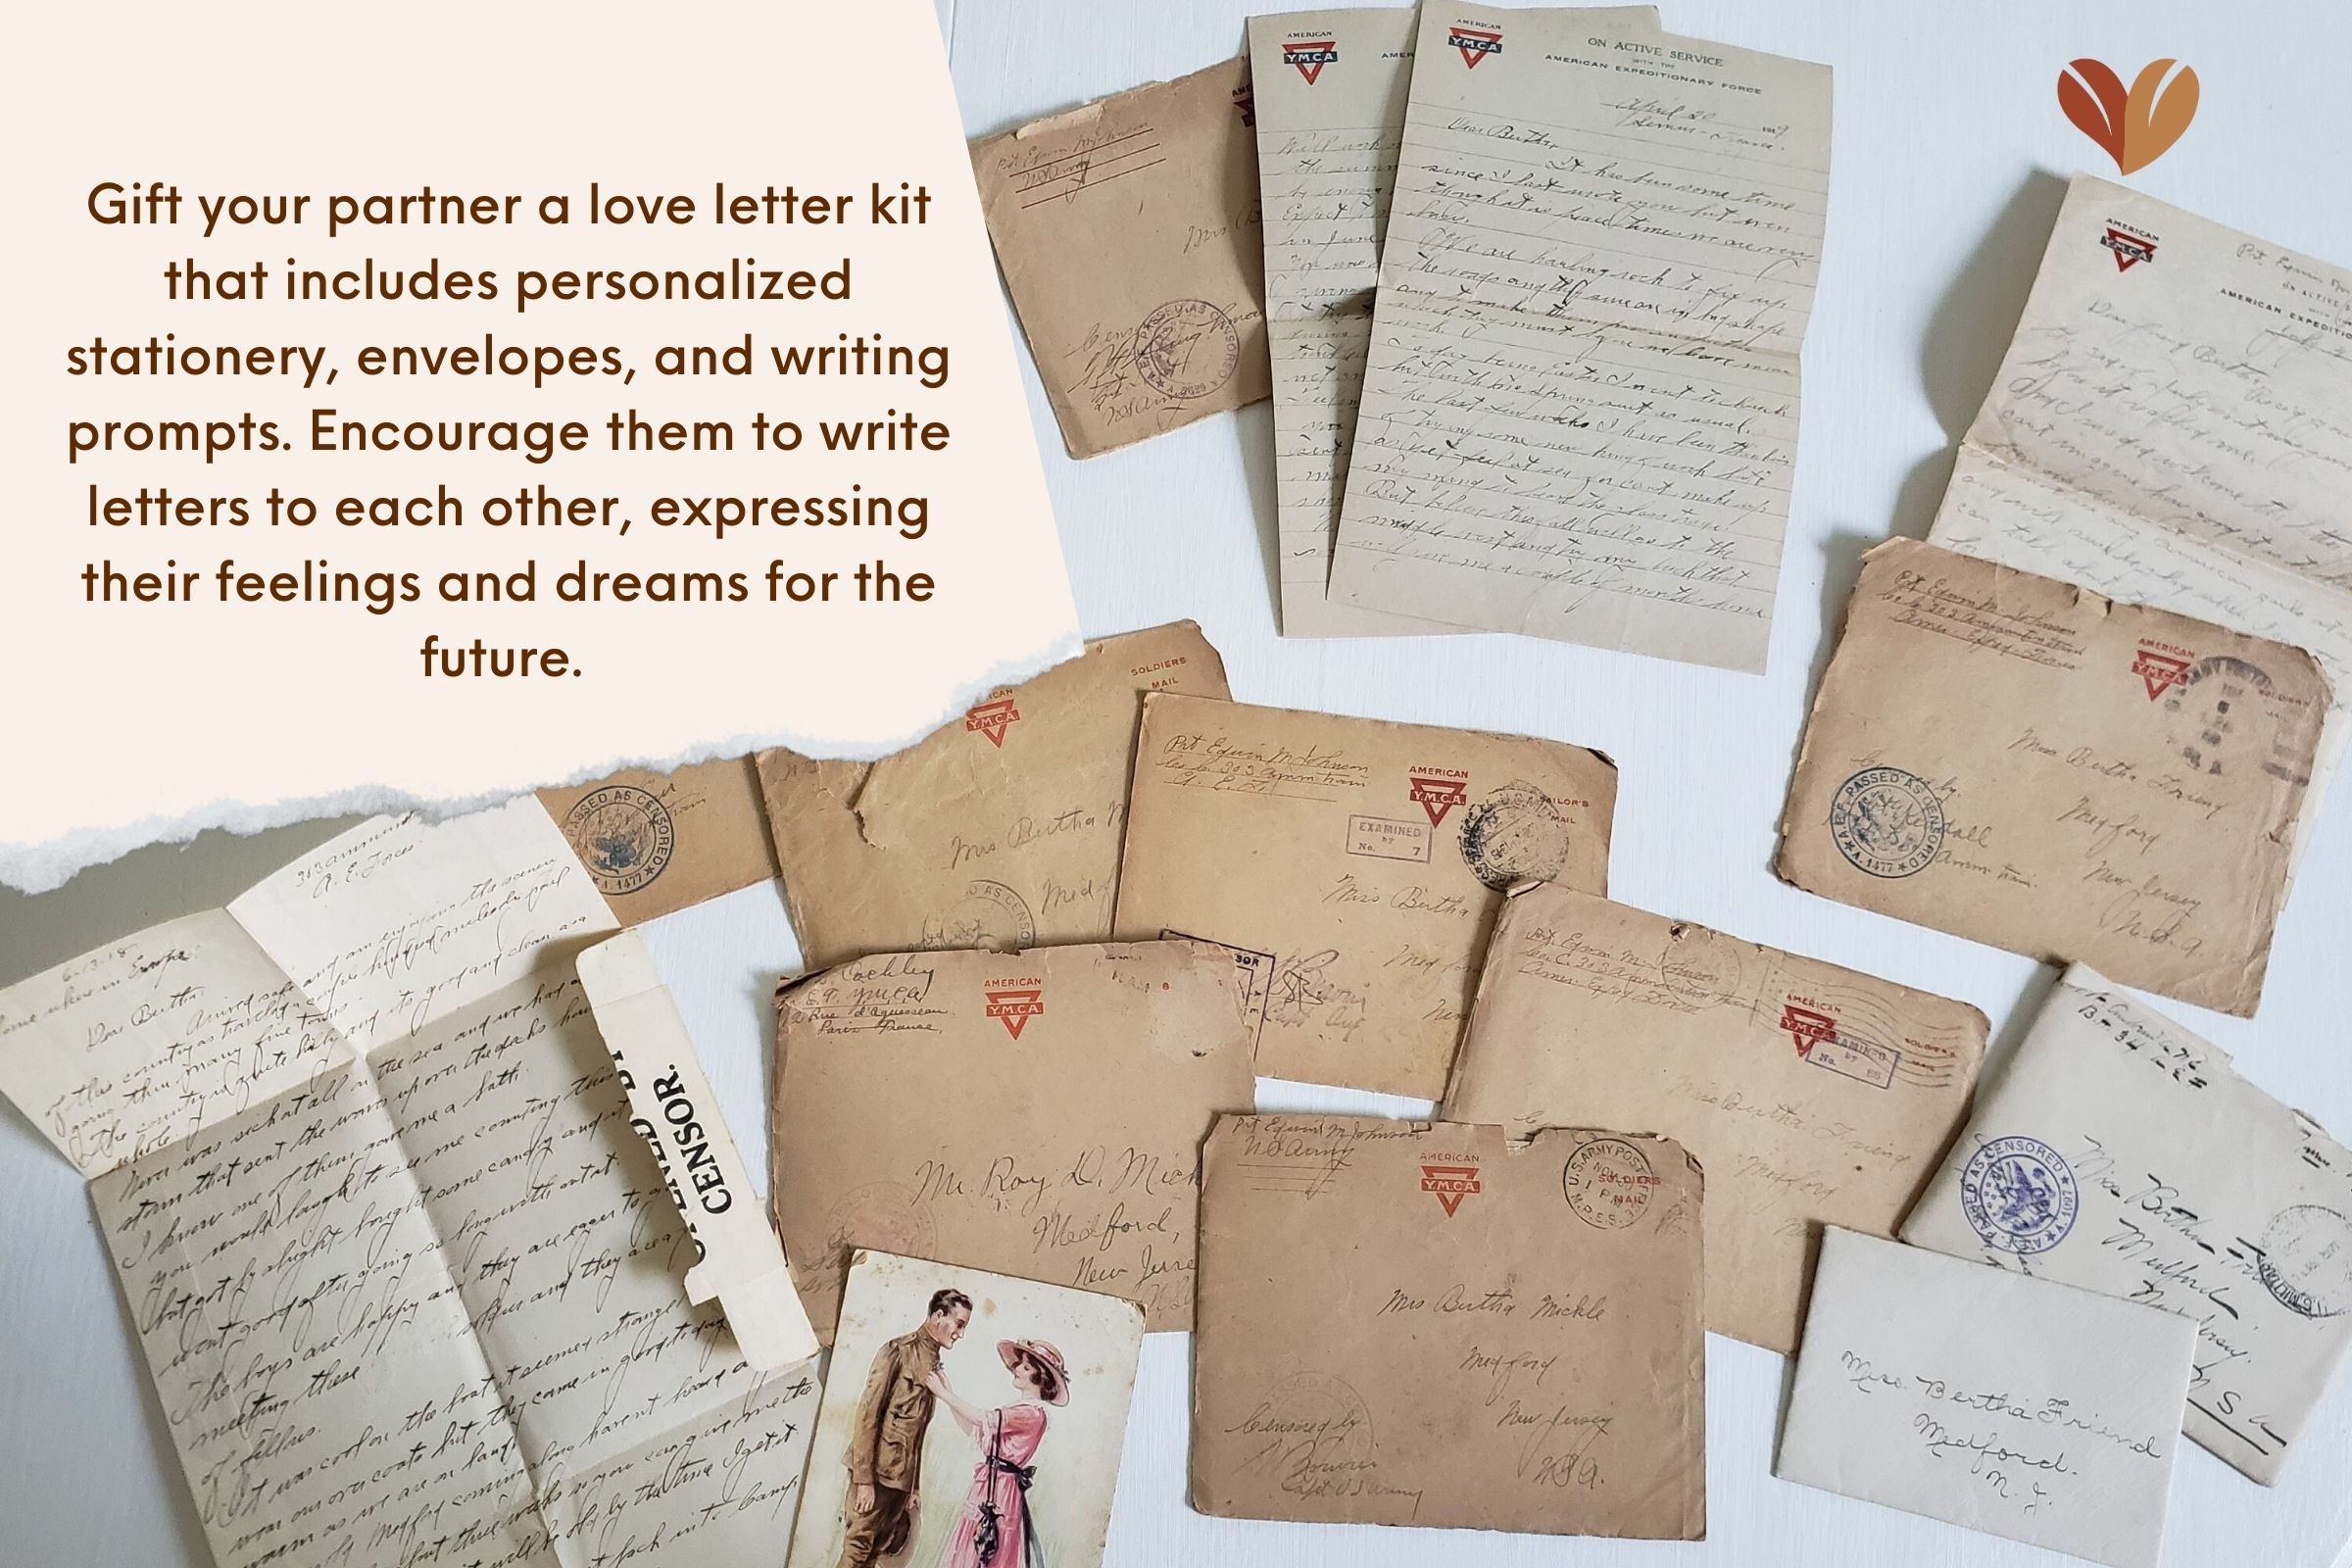 Send love letters to your lover